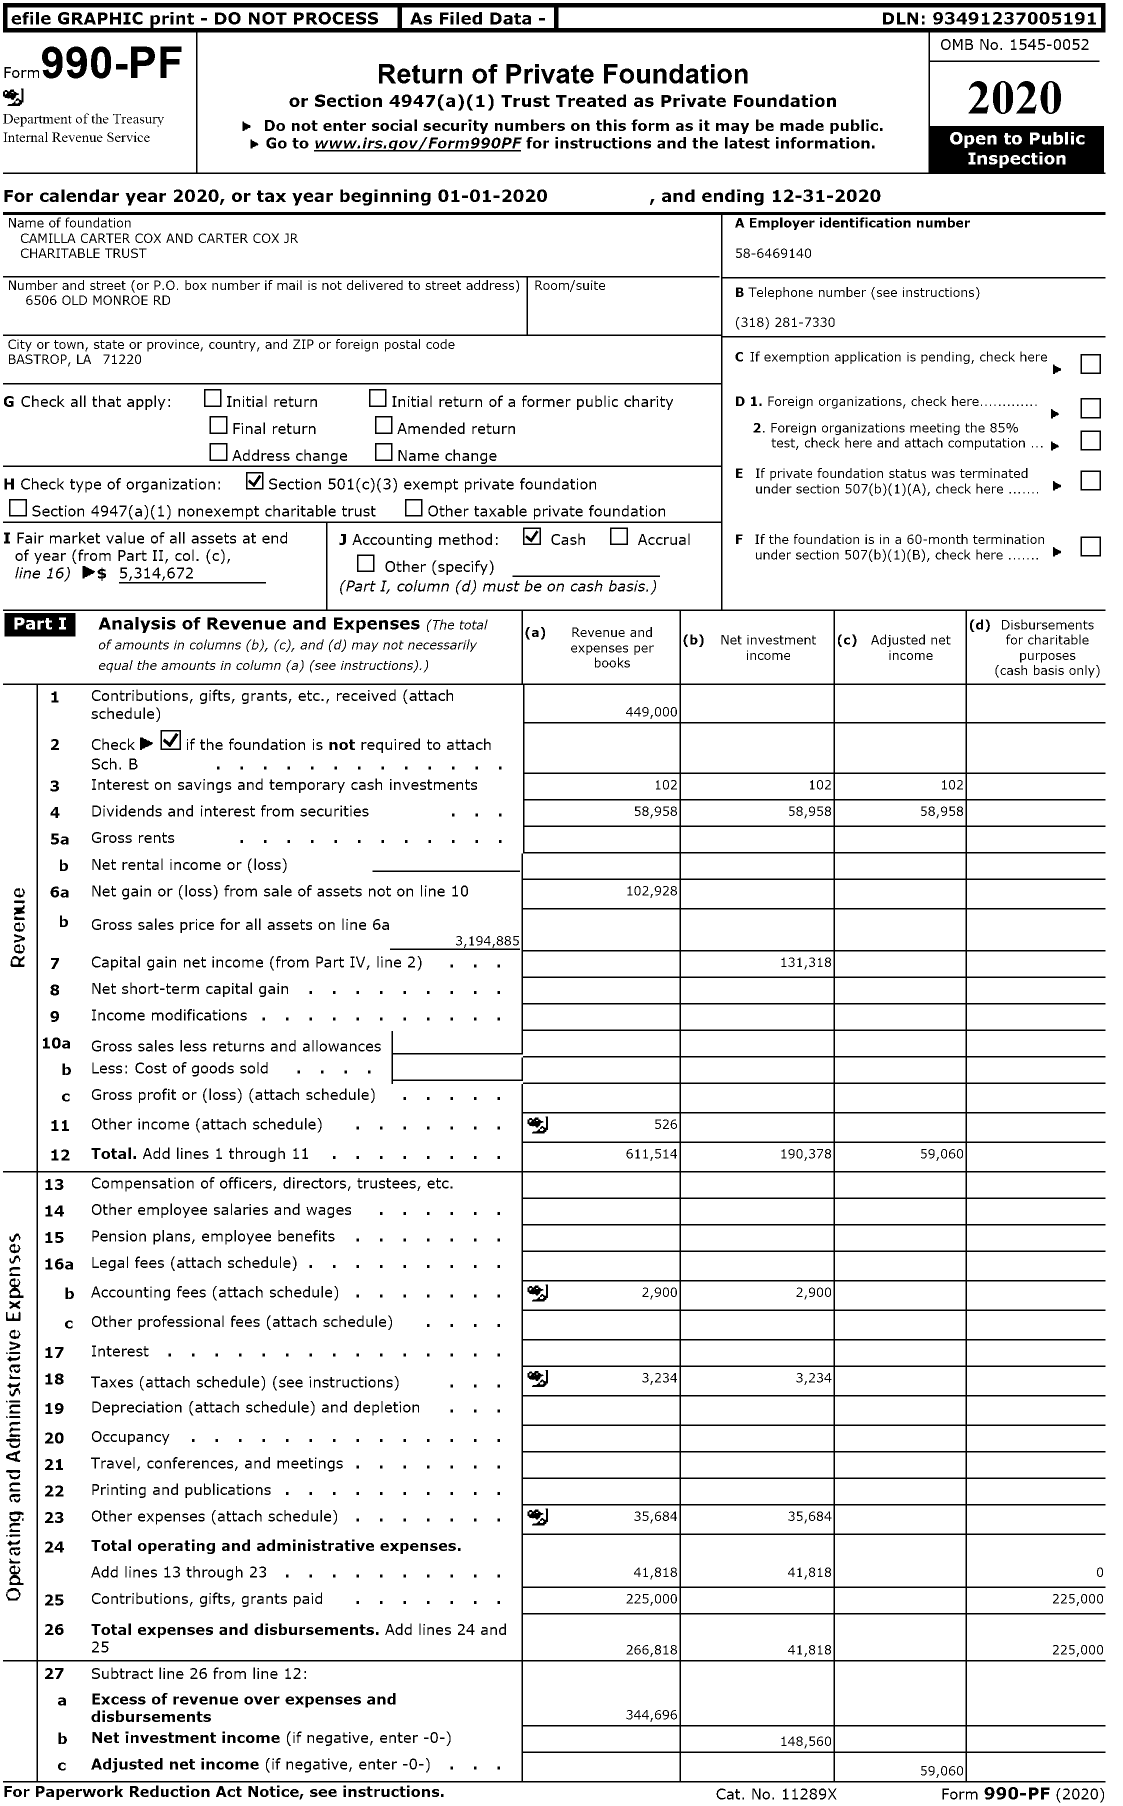 Image of first page of 2020 Form 990PF for Camilla Carter Cox and Carter Cox JR Charitable Trust